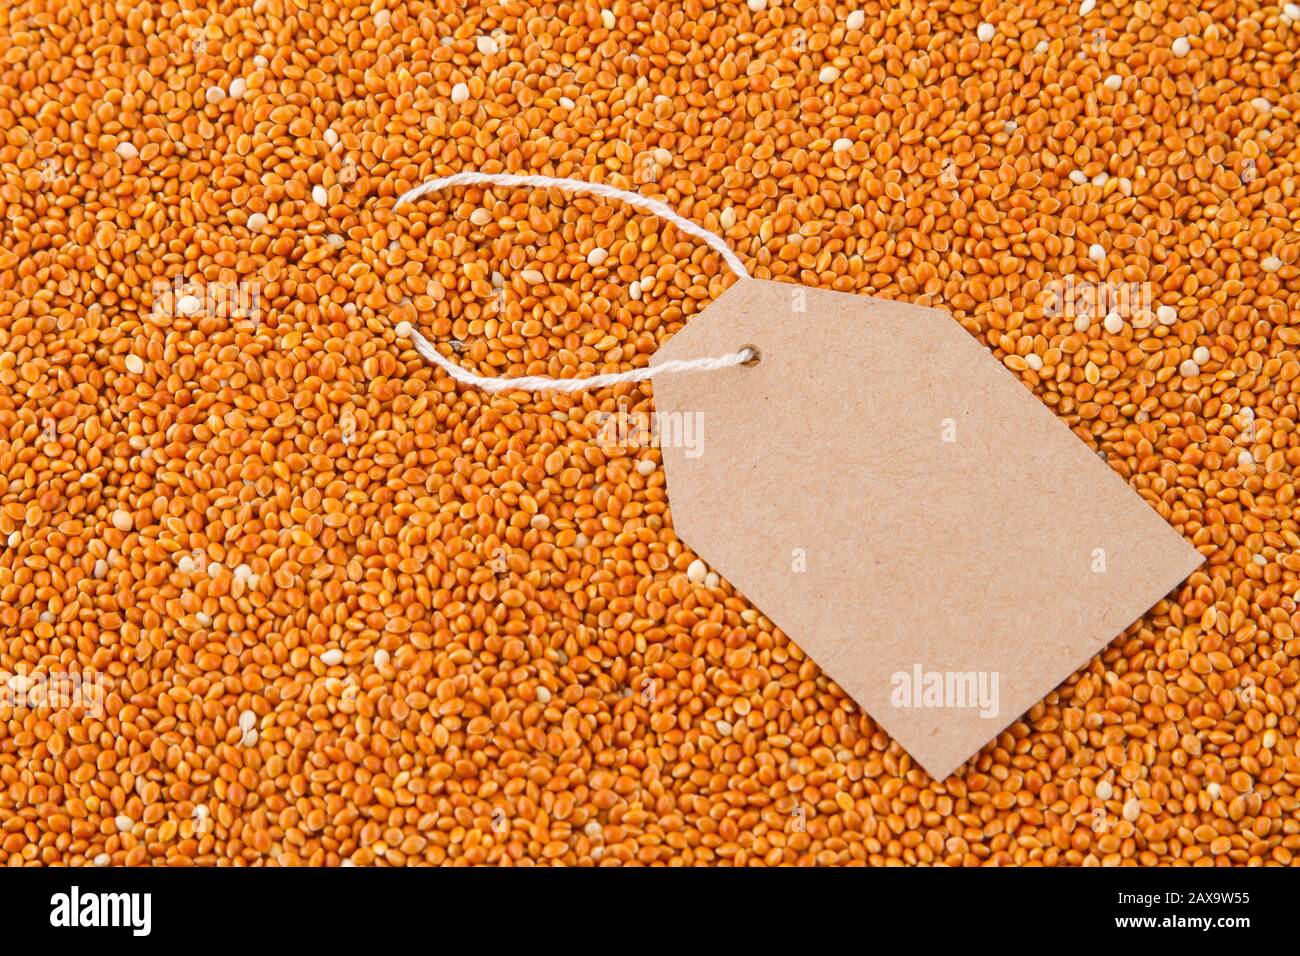 paper tag on red millet. Stock Photo